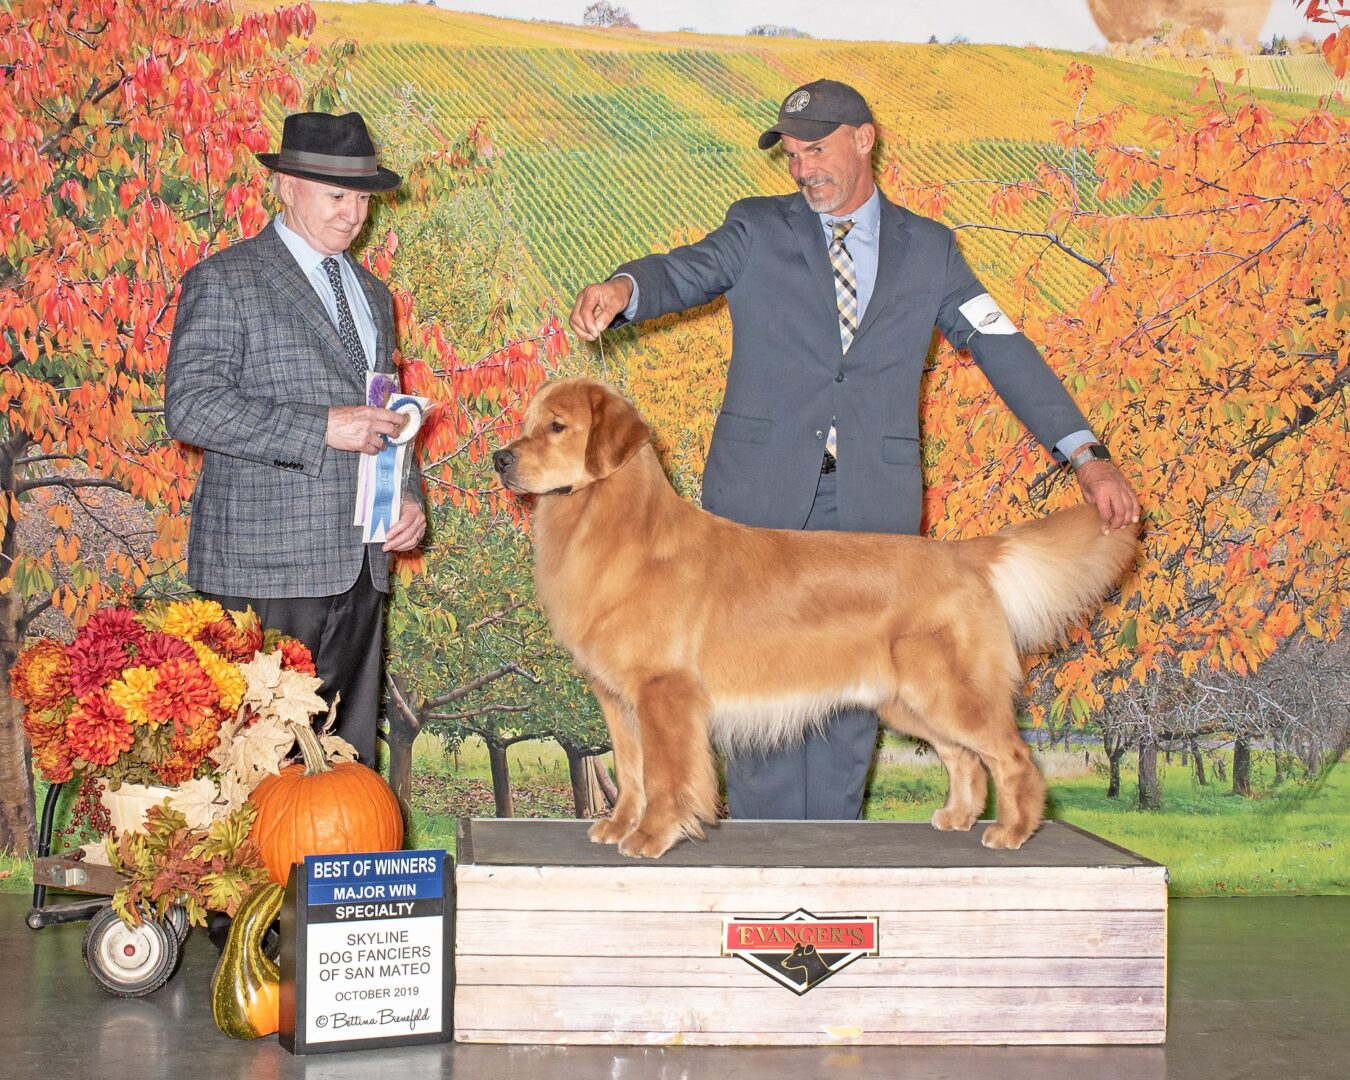 Two men standing next to a golden retriever on a stage.